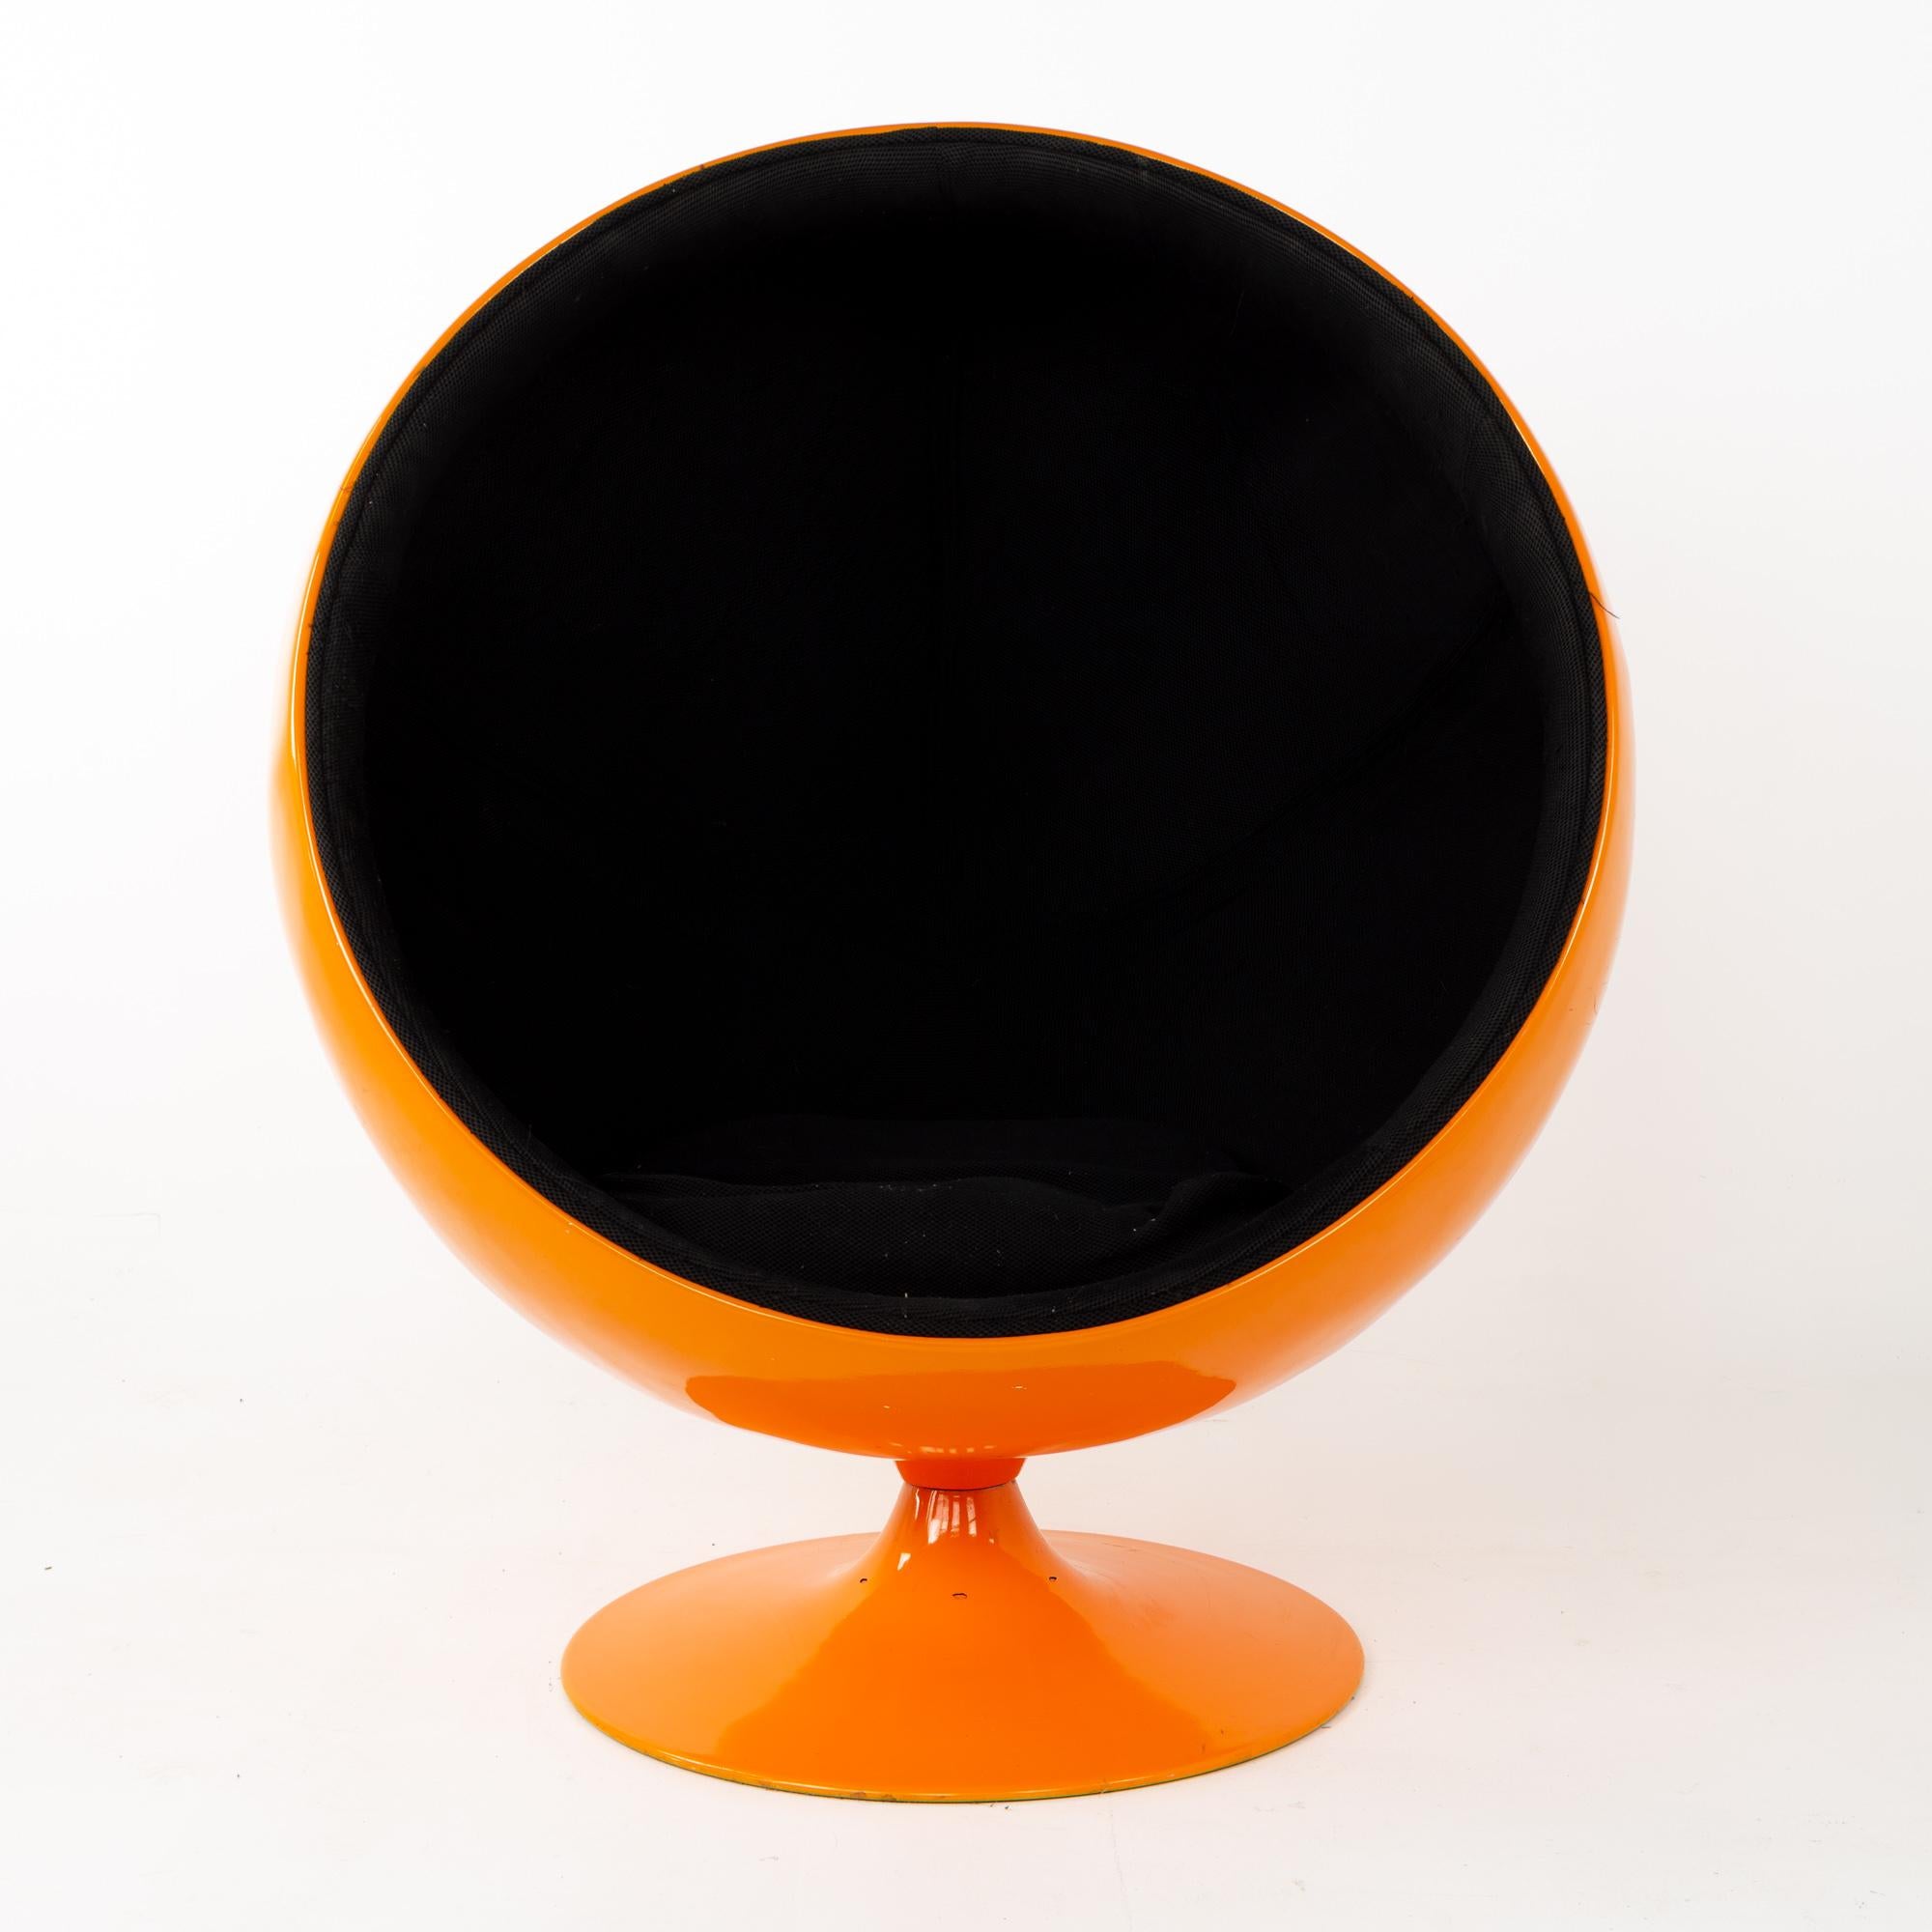 Eero Aarnio style Mid Century orange ball chair.
This chair is 39.5 wide x 32.25 deep x 48 inches high, with a seat height of 17 inches

This piece is available in what we call restored vintage condition. Upon purchase it is thoroughly cleaned and